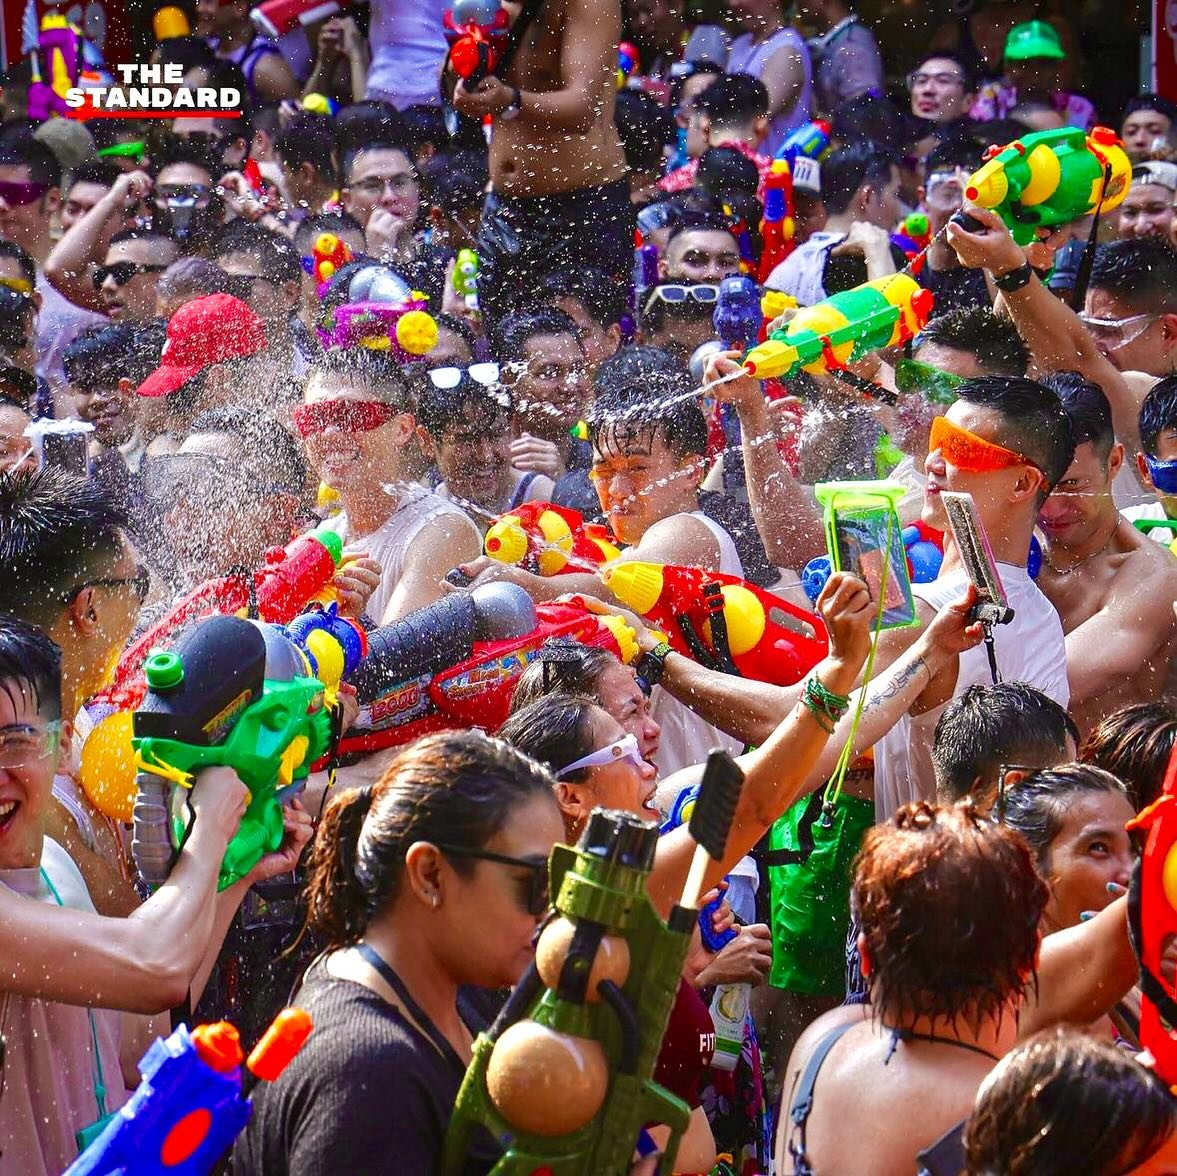 📌 Water Festival &lsquo;Song Kran&rsquo; Thai New Year - Thank you for Photos @thestandardth.ig 🙏

📌 Thailand&rsquo;s most famous and vibrant festival. Celebrated annually from April 13th - 15th, Songkran marks the traditional Thai New Year, a tim